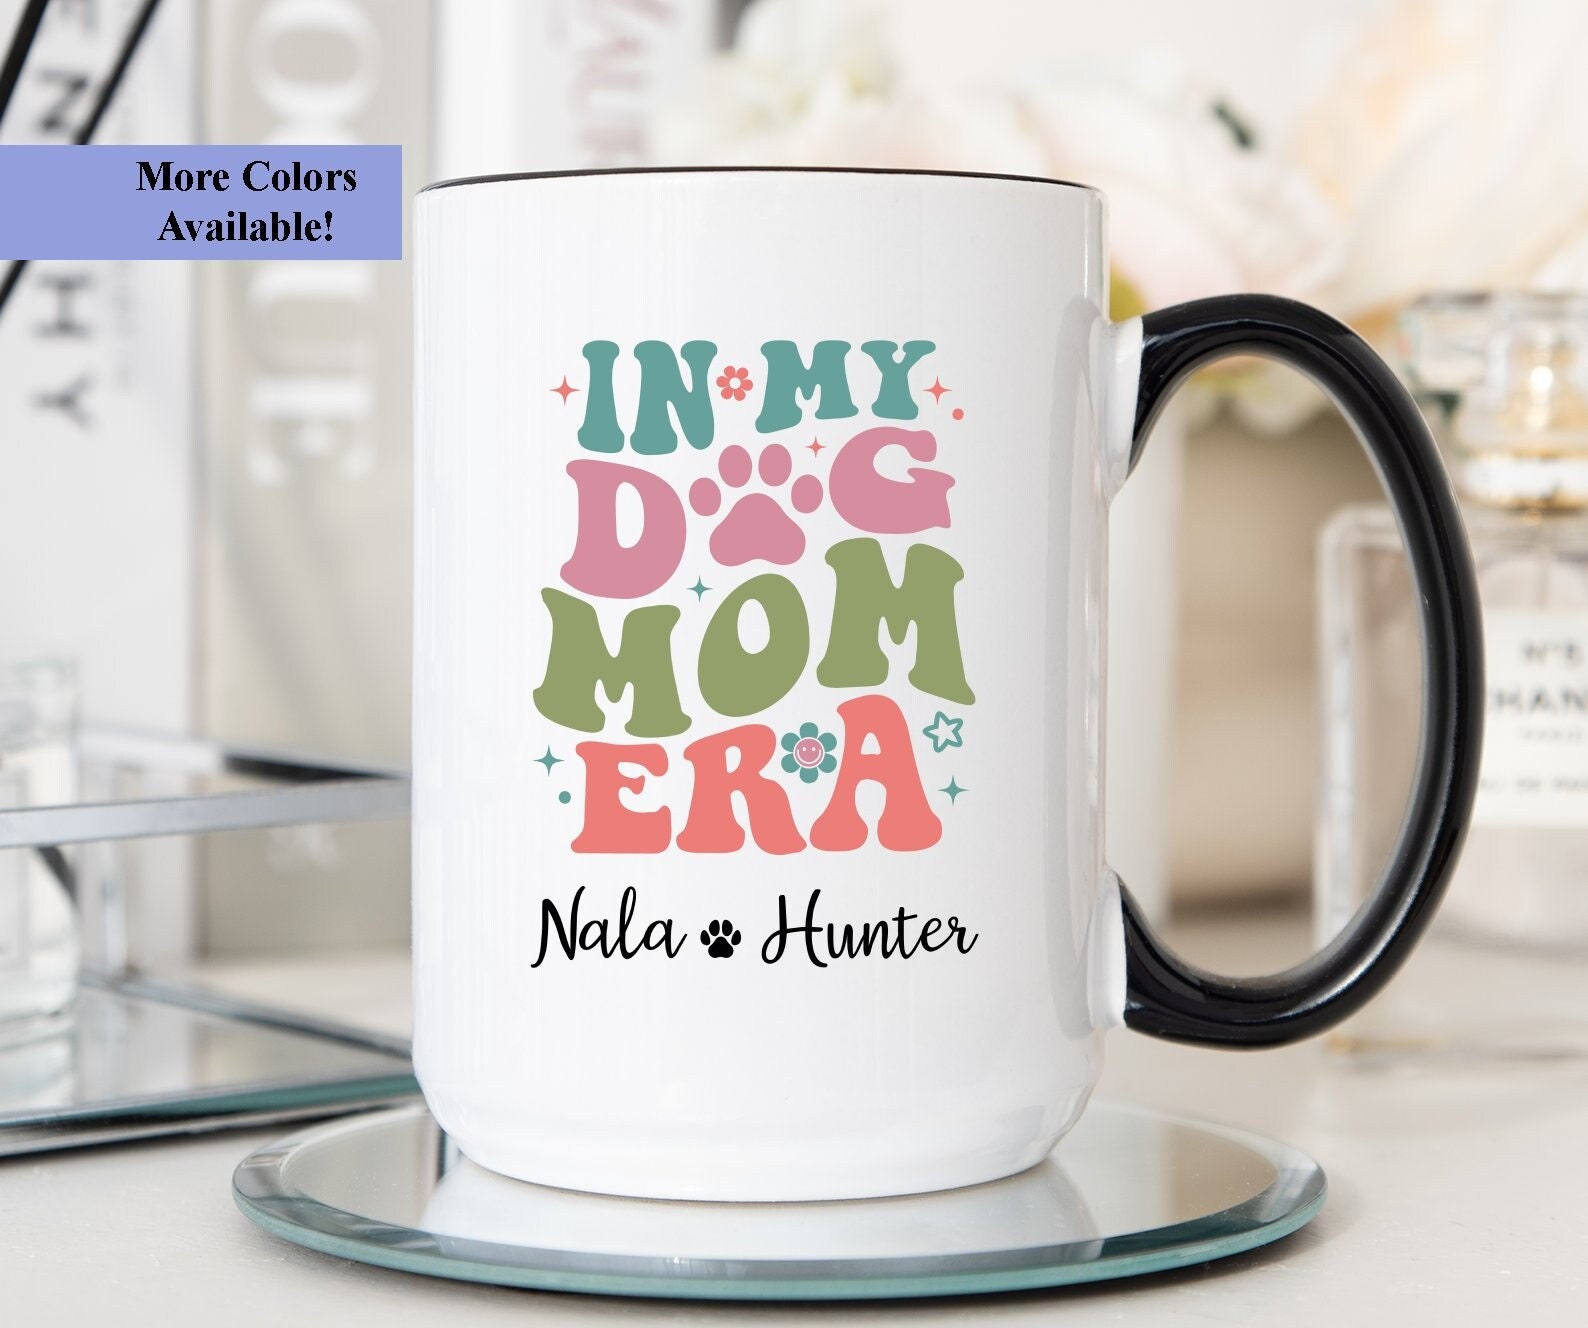 Fur Mama, Best Dog Mom Mugs, Customized Mugs for Dog Lovers, Personalized  Mother's Day gifts